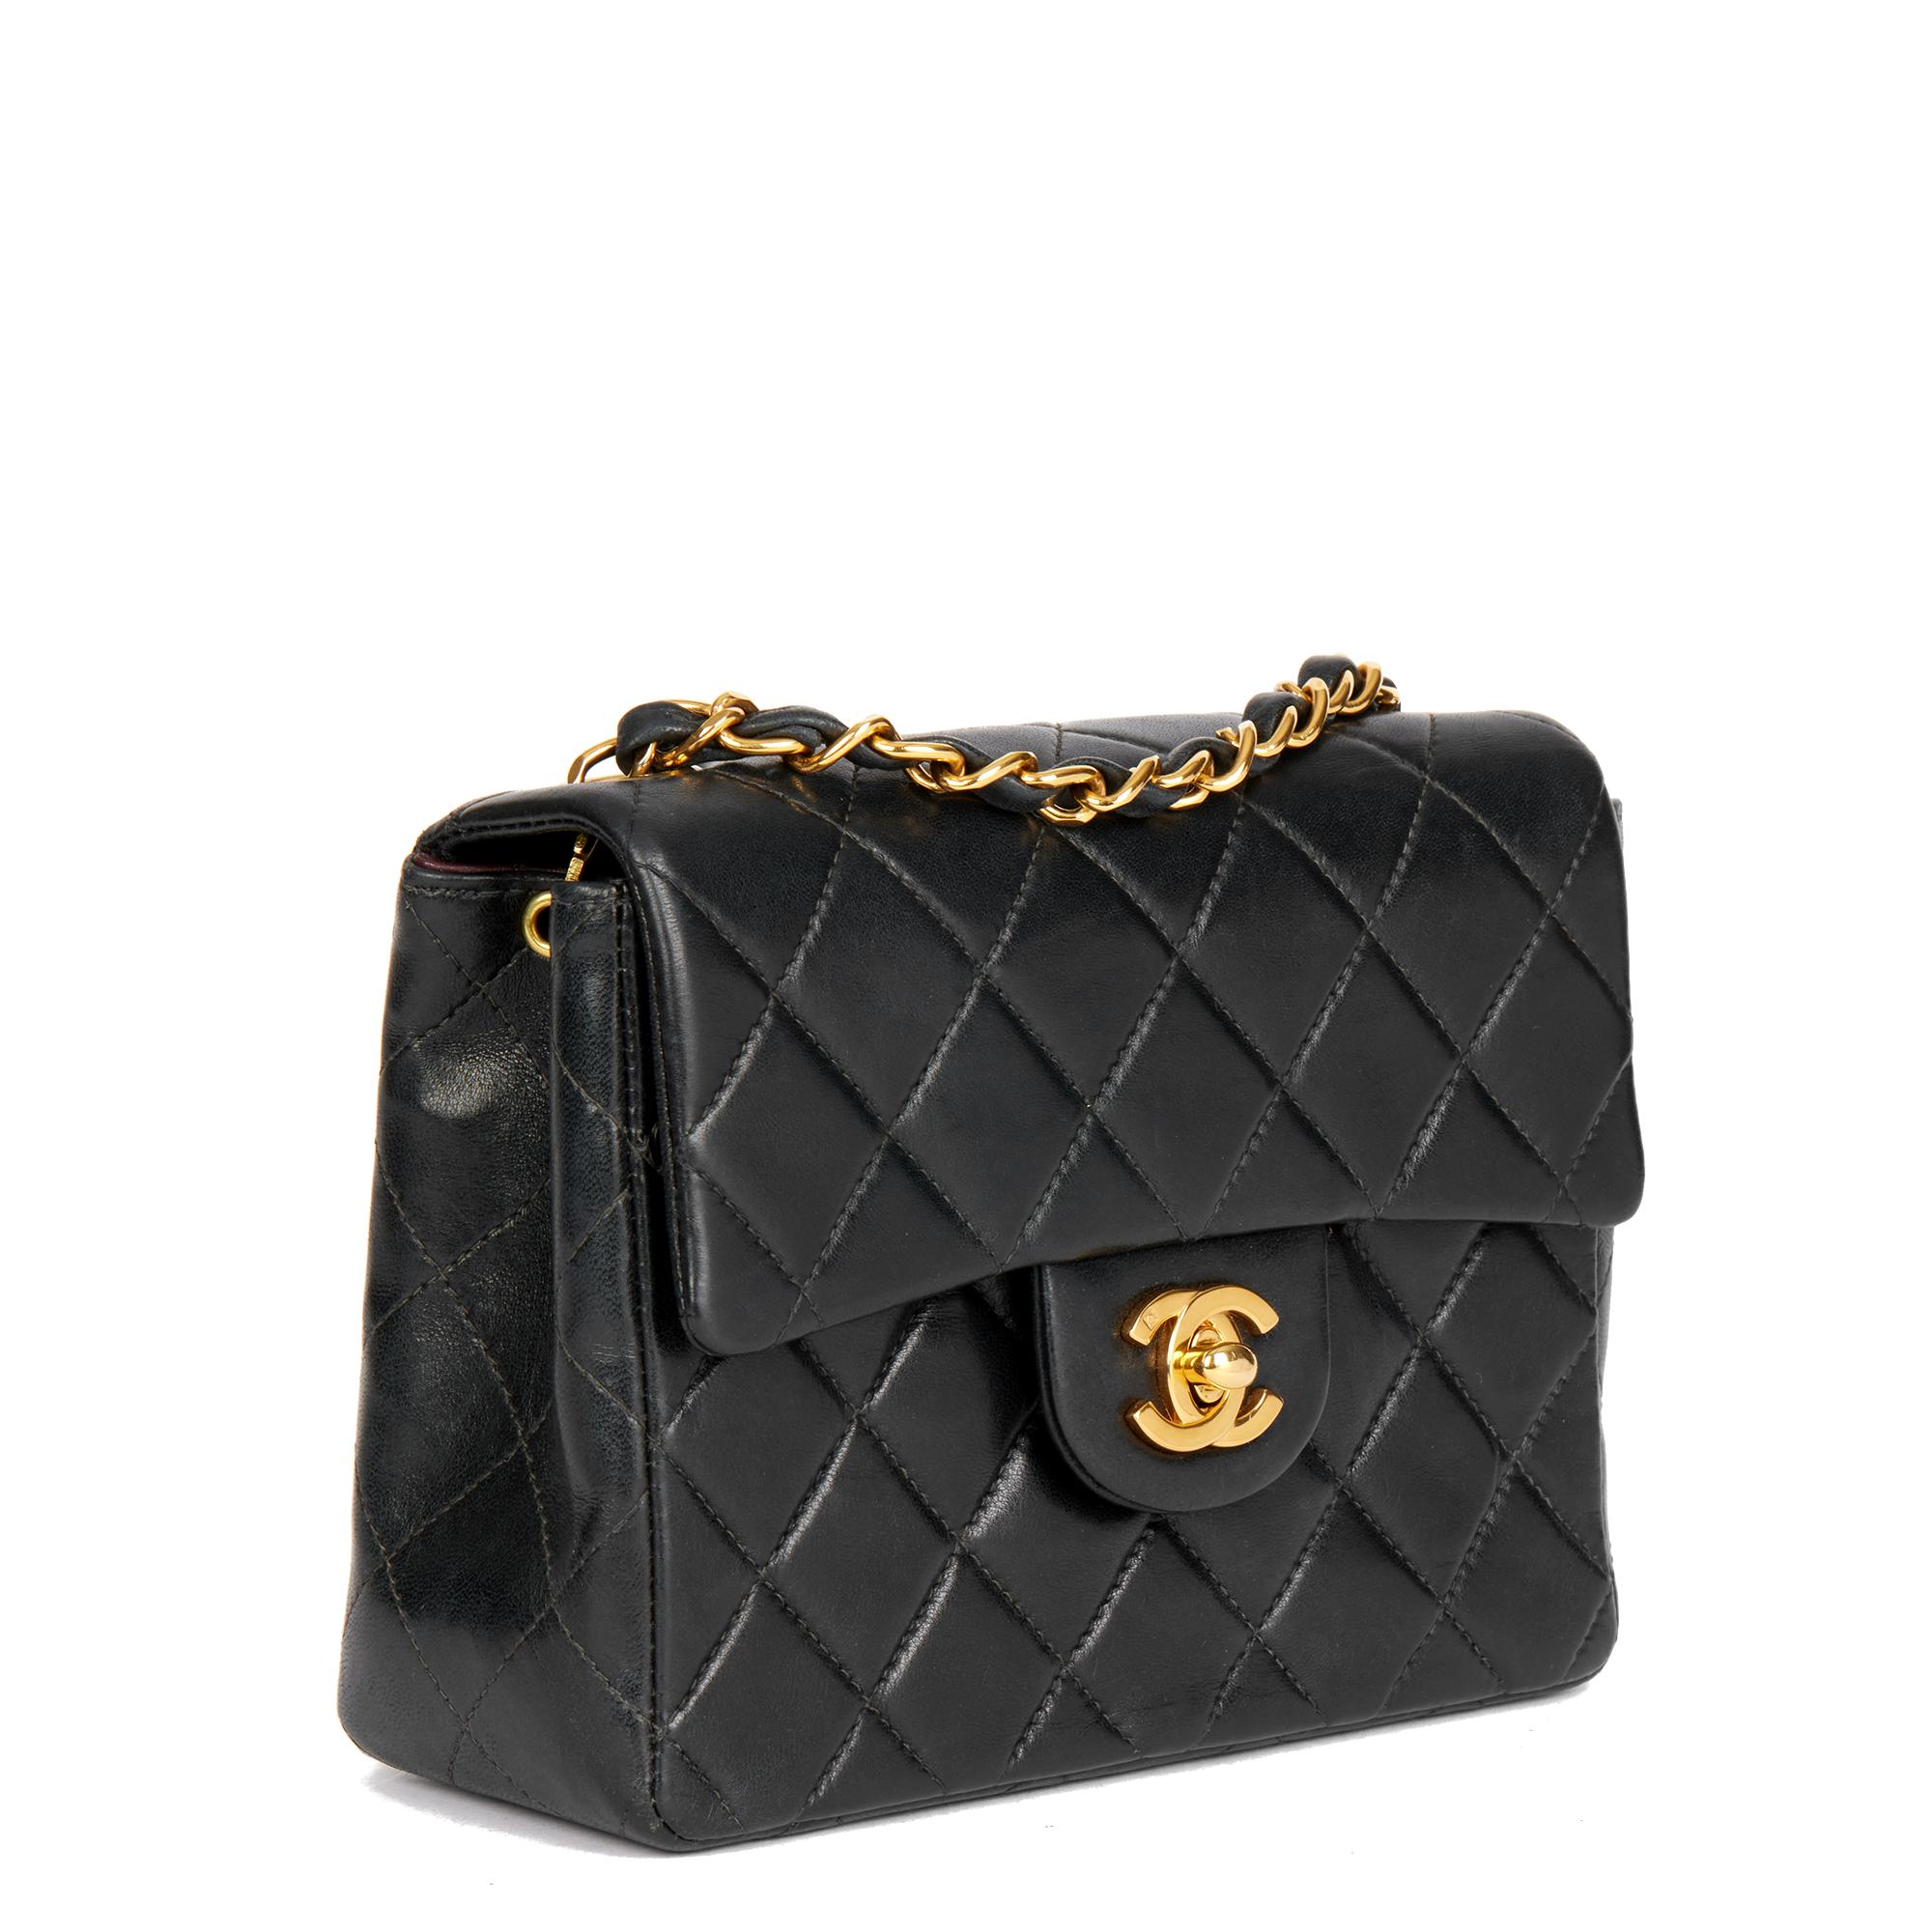 CHANEL
Black Quilted Lambskin Vintage Square Mini Flap Bag

Xupes Reference: HB4648
Serial Number: 6933852
Age (Circa): 2002
Accompanied By: Authenticity Card
Authenticity Details: Authenticity Card, Serial Sticker (Made in France)
Gender: